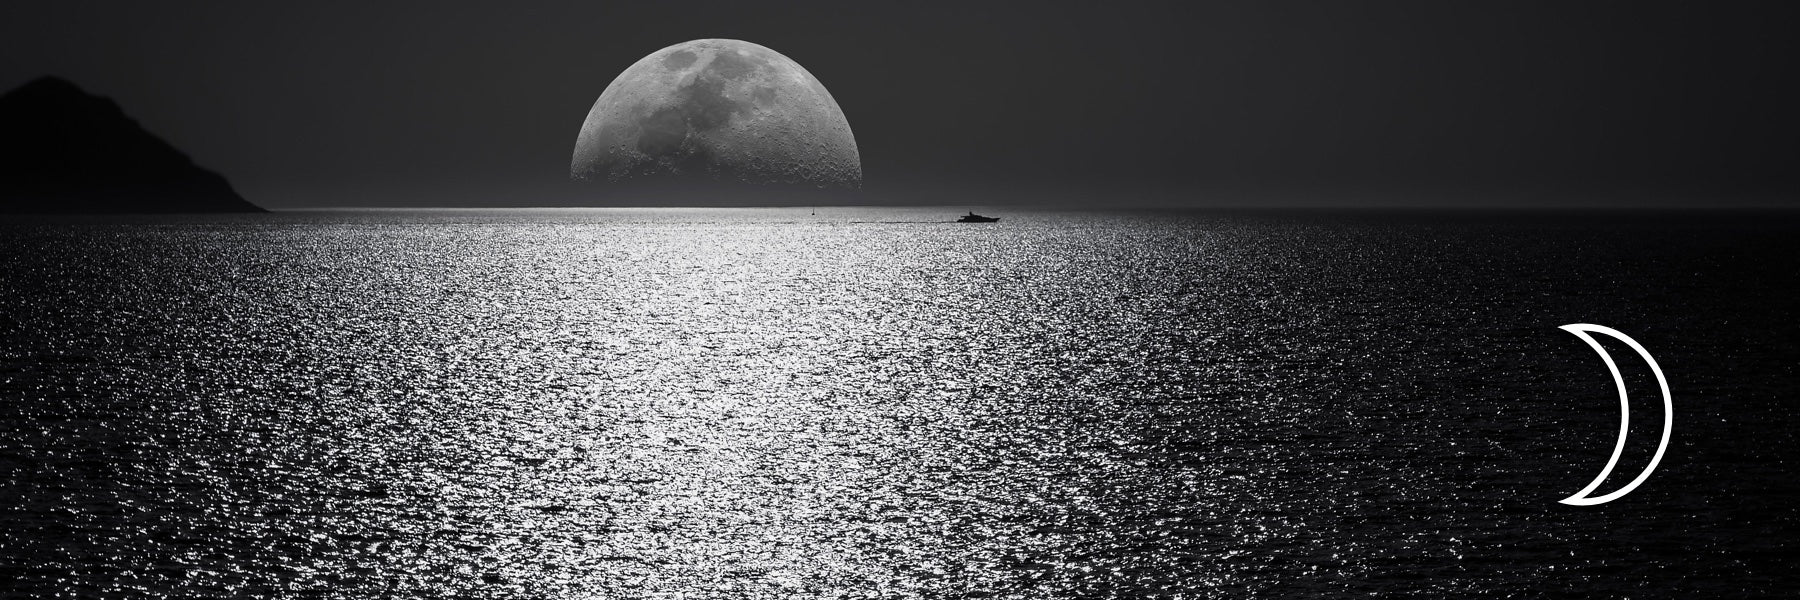 Full Moon and the Ocean